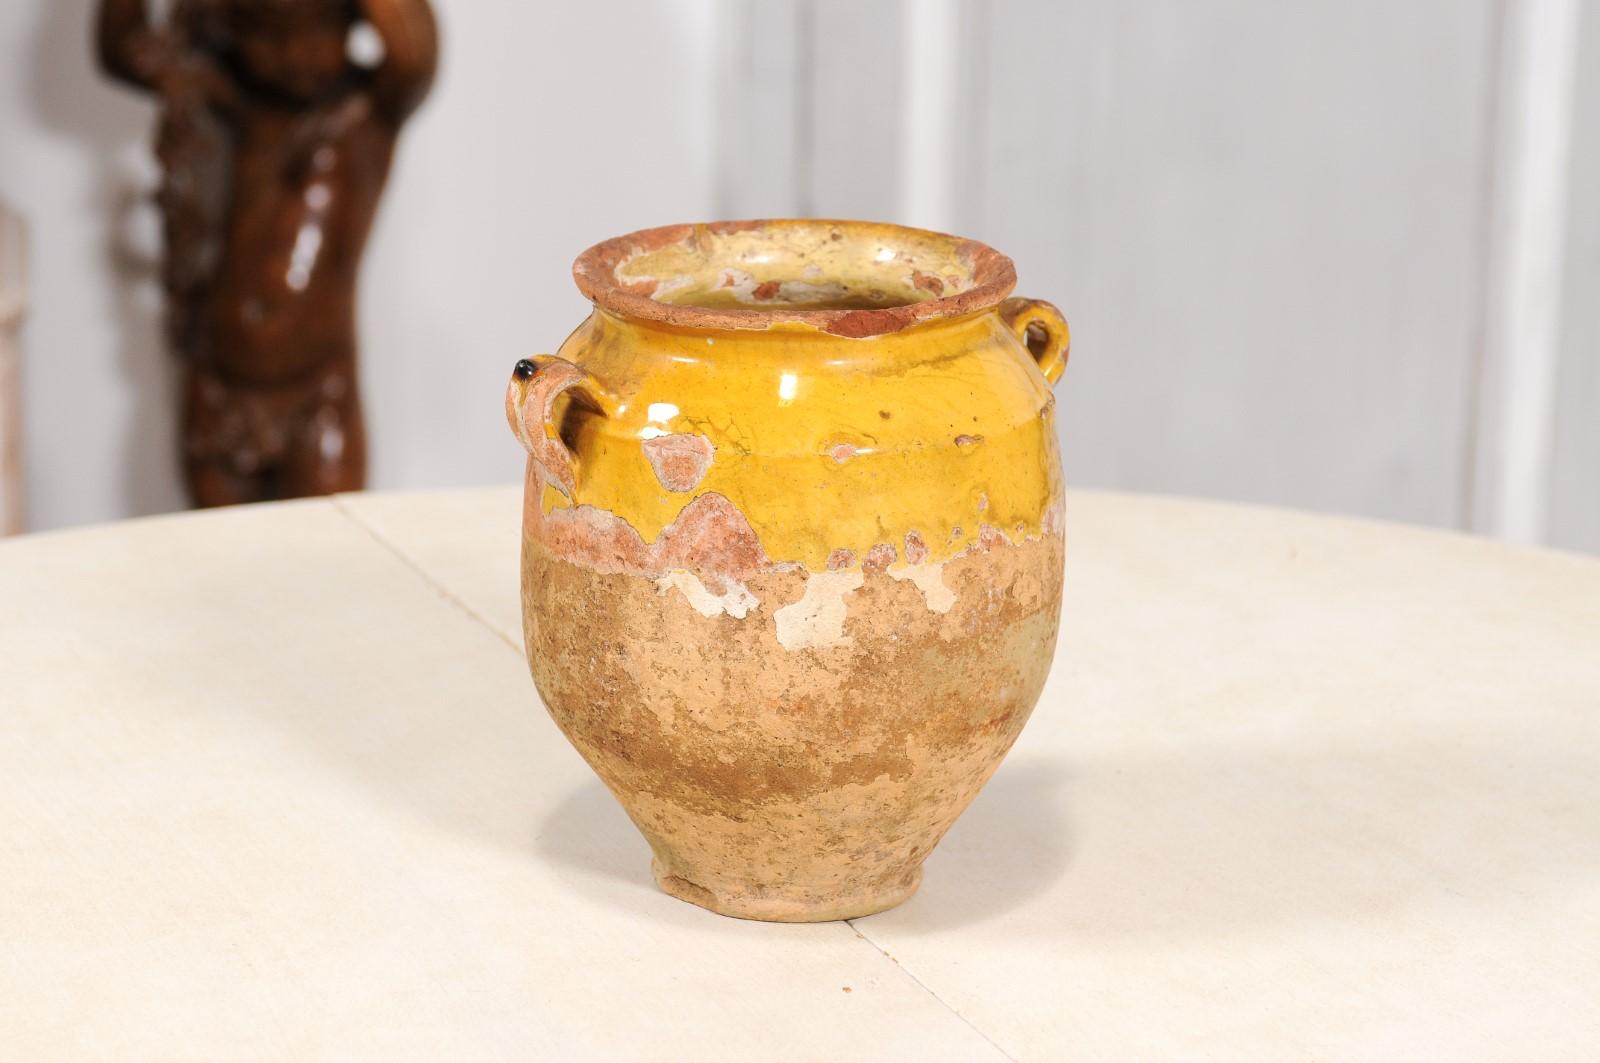 Glazed 19th Century Rustic French Provincial Pot à Confit with Yellow Glaze and Handles